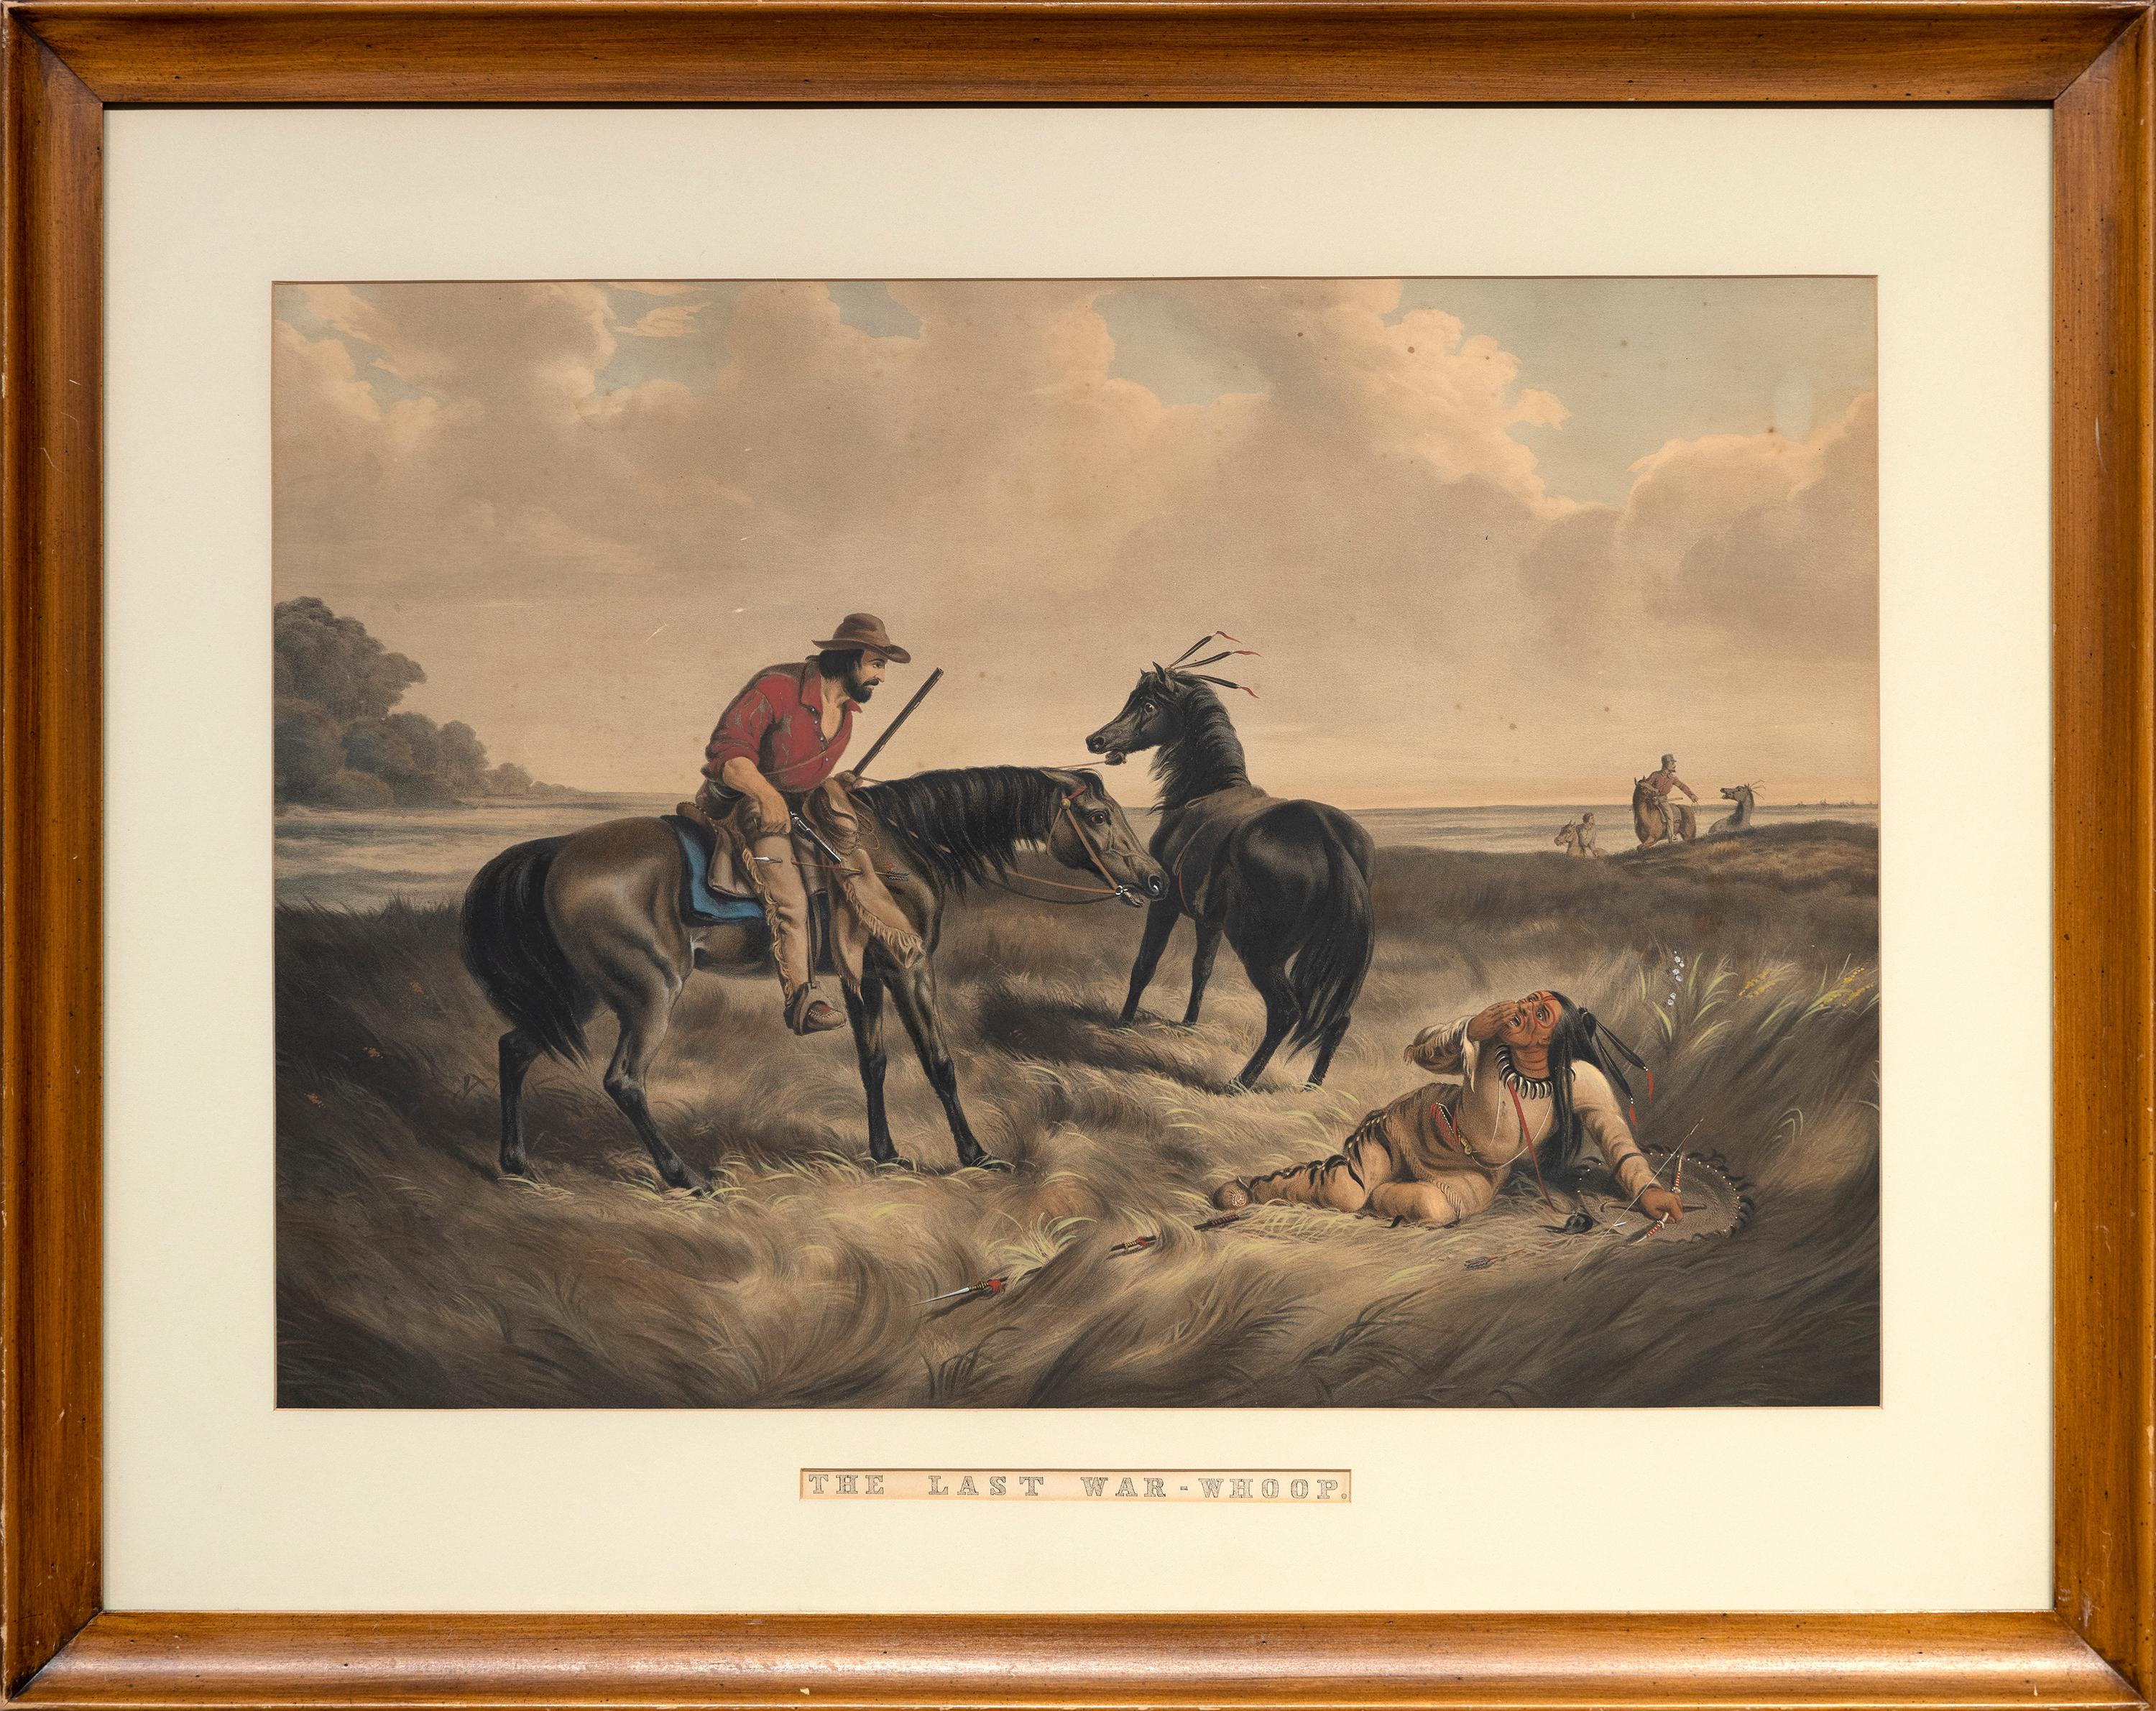 The Last War-Whoop! - Print by Currier & Ives